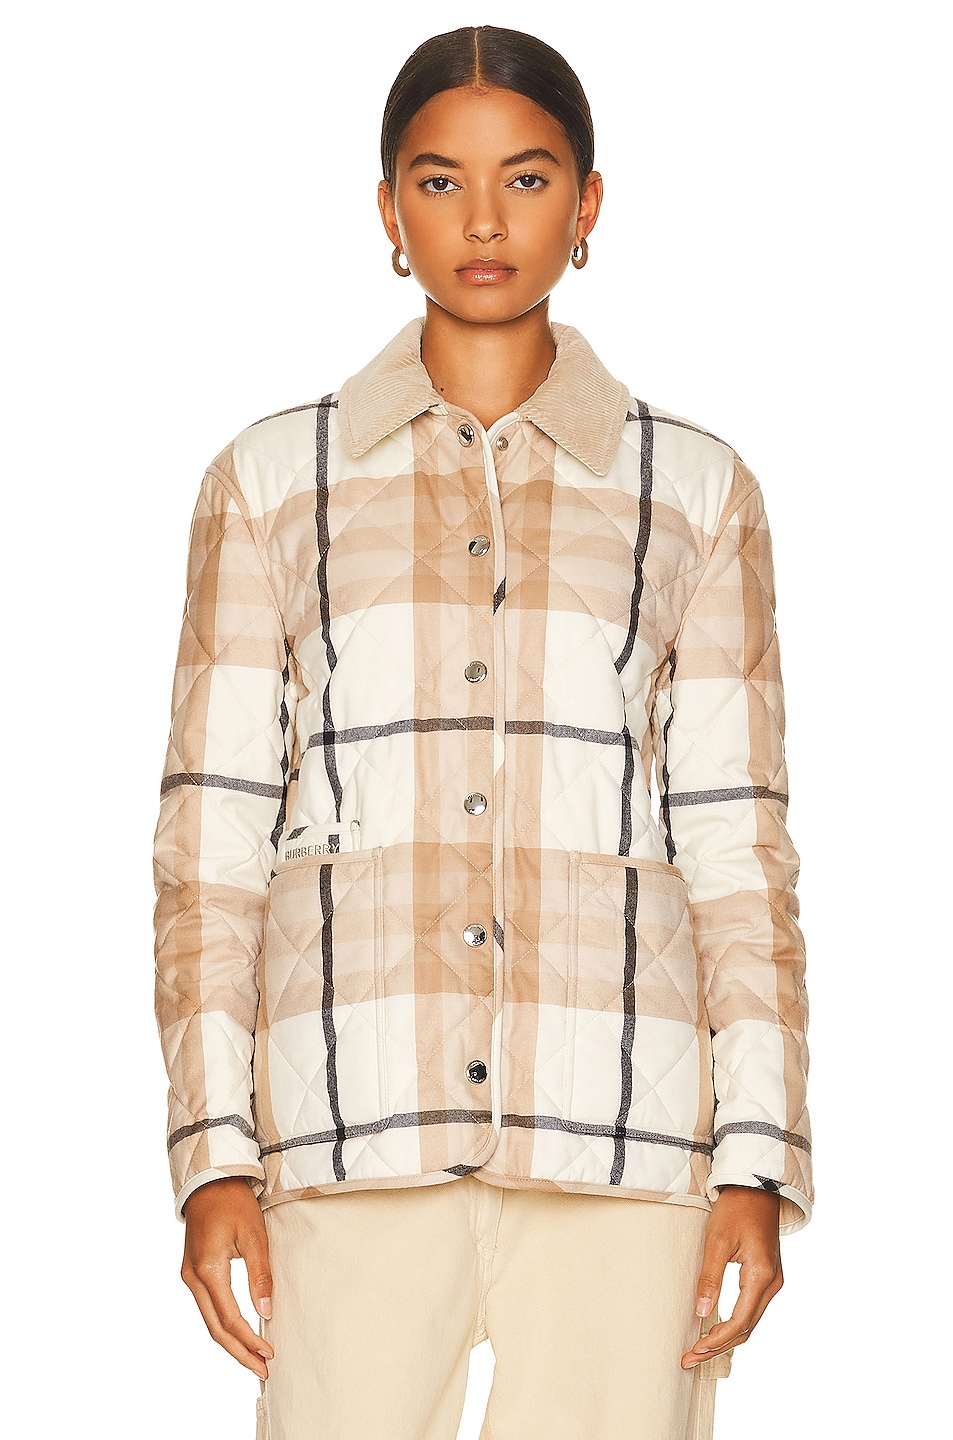 Burberry Dranefeld Jacket in Frosted White Check | FWRD